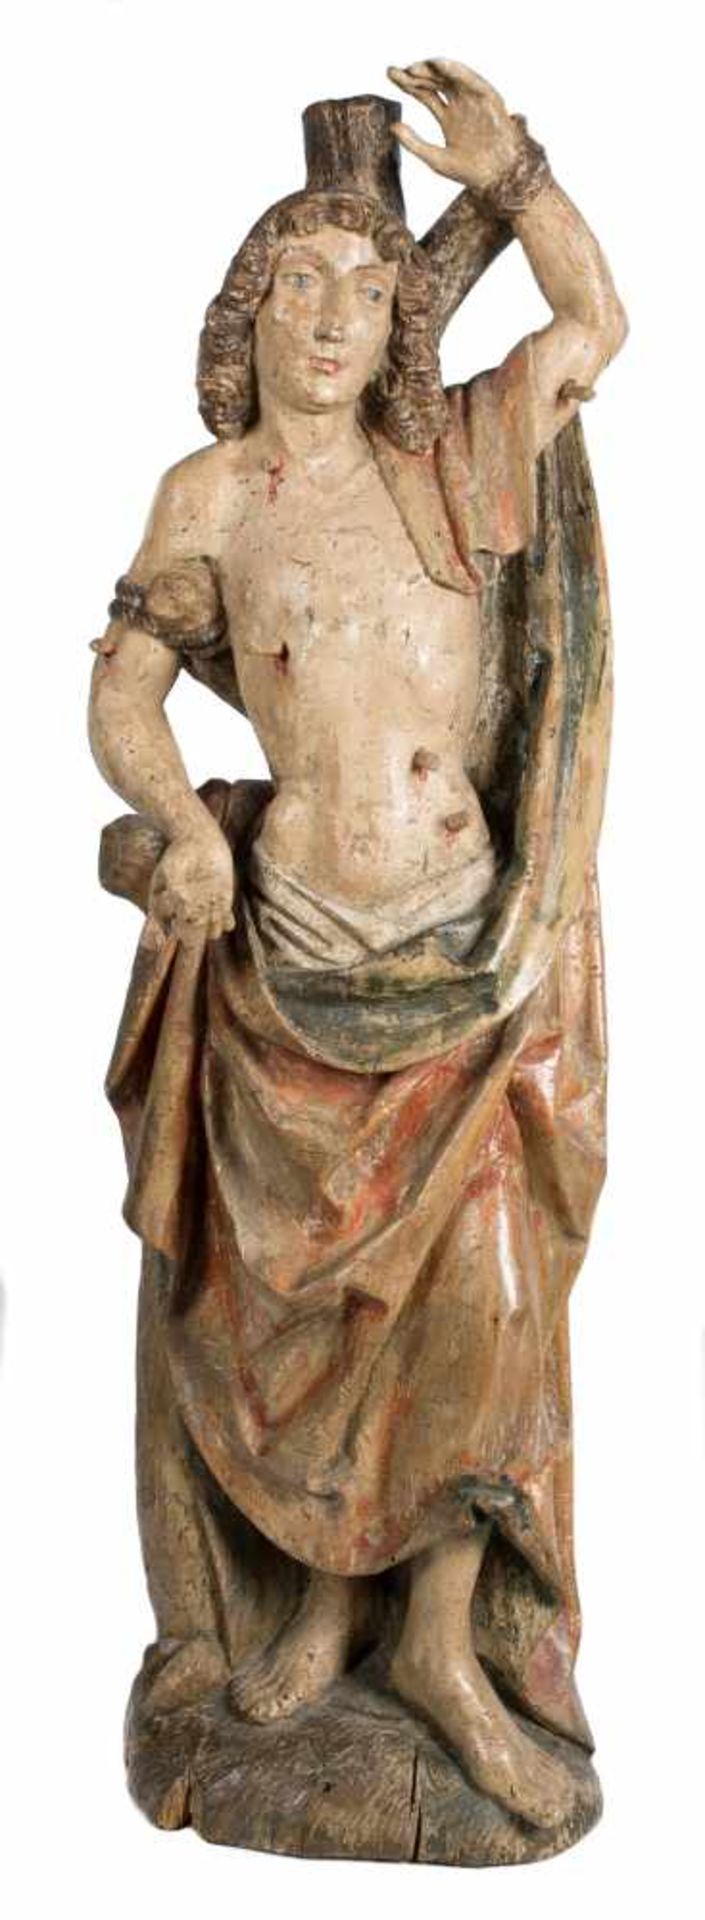 "Saint Sebastian". Carved and polychromed wooden sculpture. Germany. 15th century.